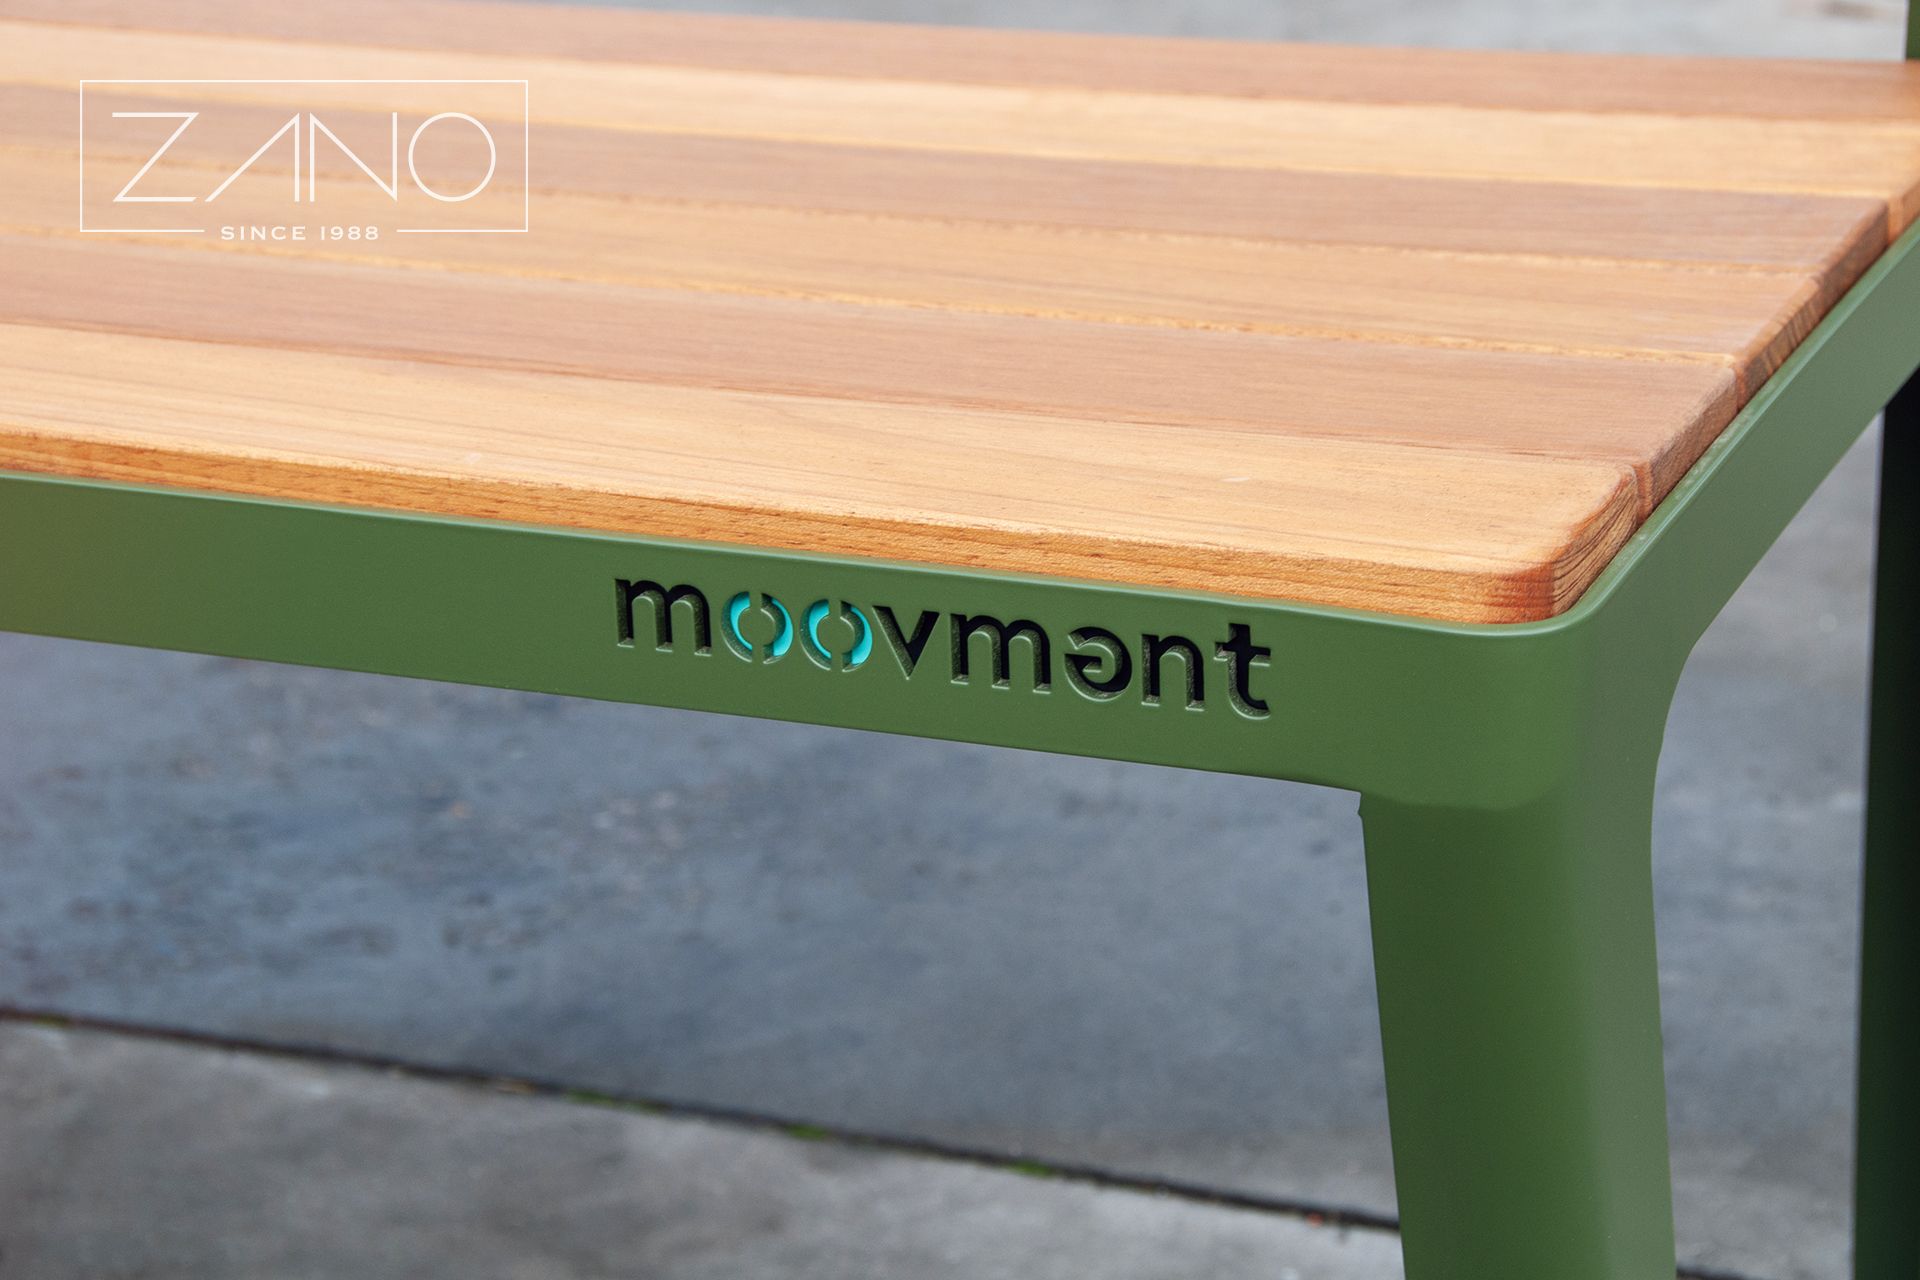 Company logo cut into city bench structure